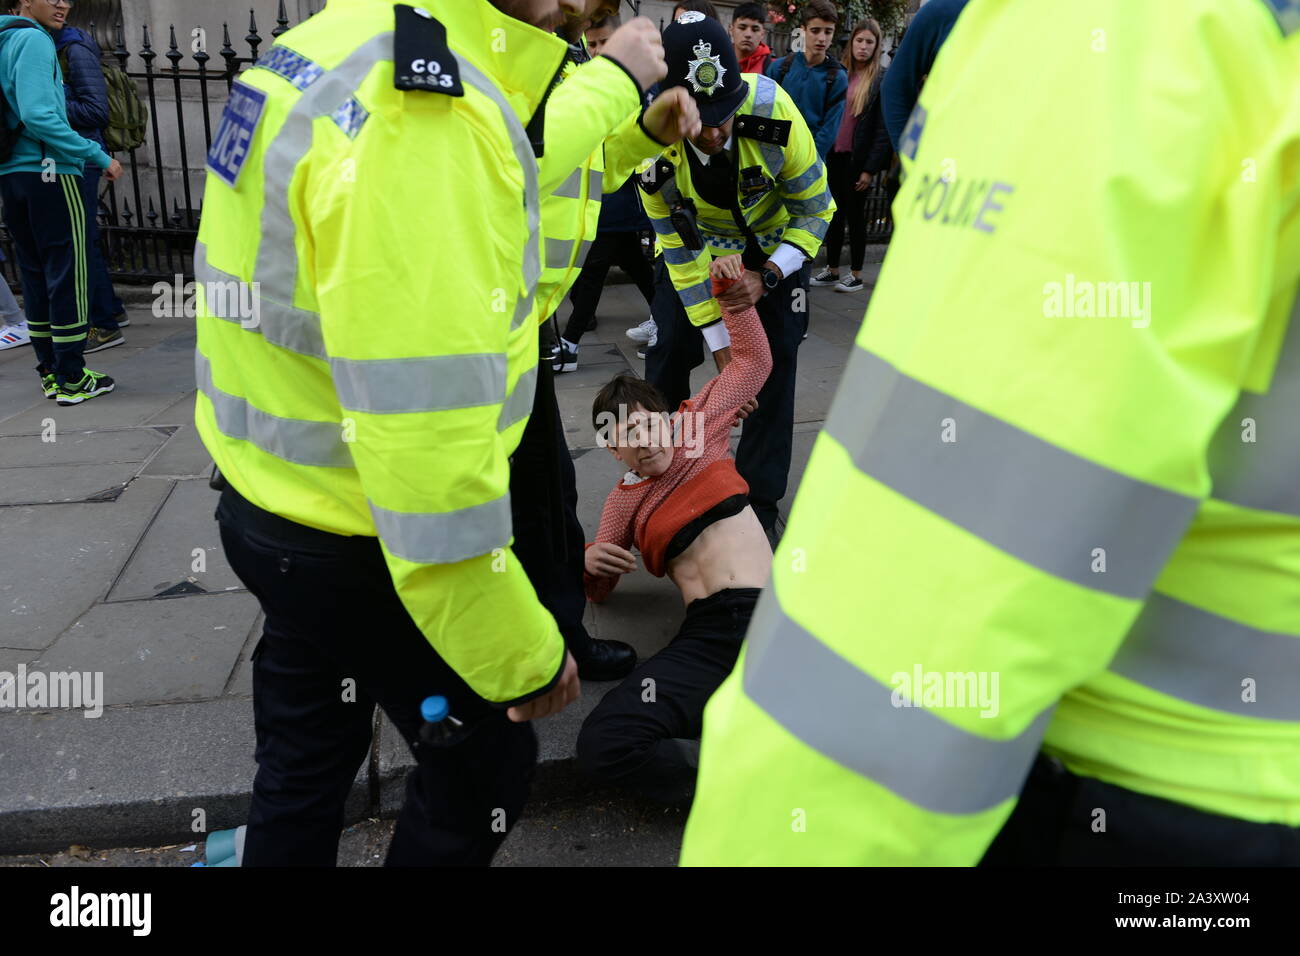 Demonstrator being moved during the Extinction Rebellion demonstration in London Stock Photo